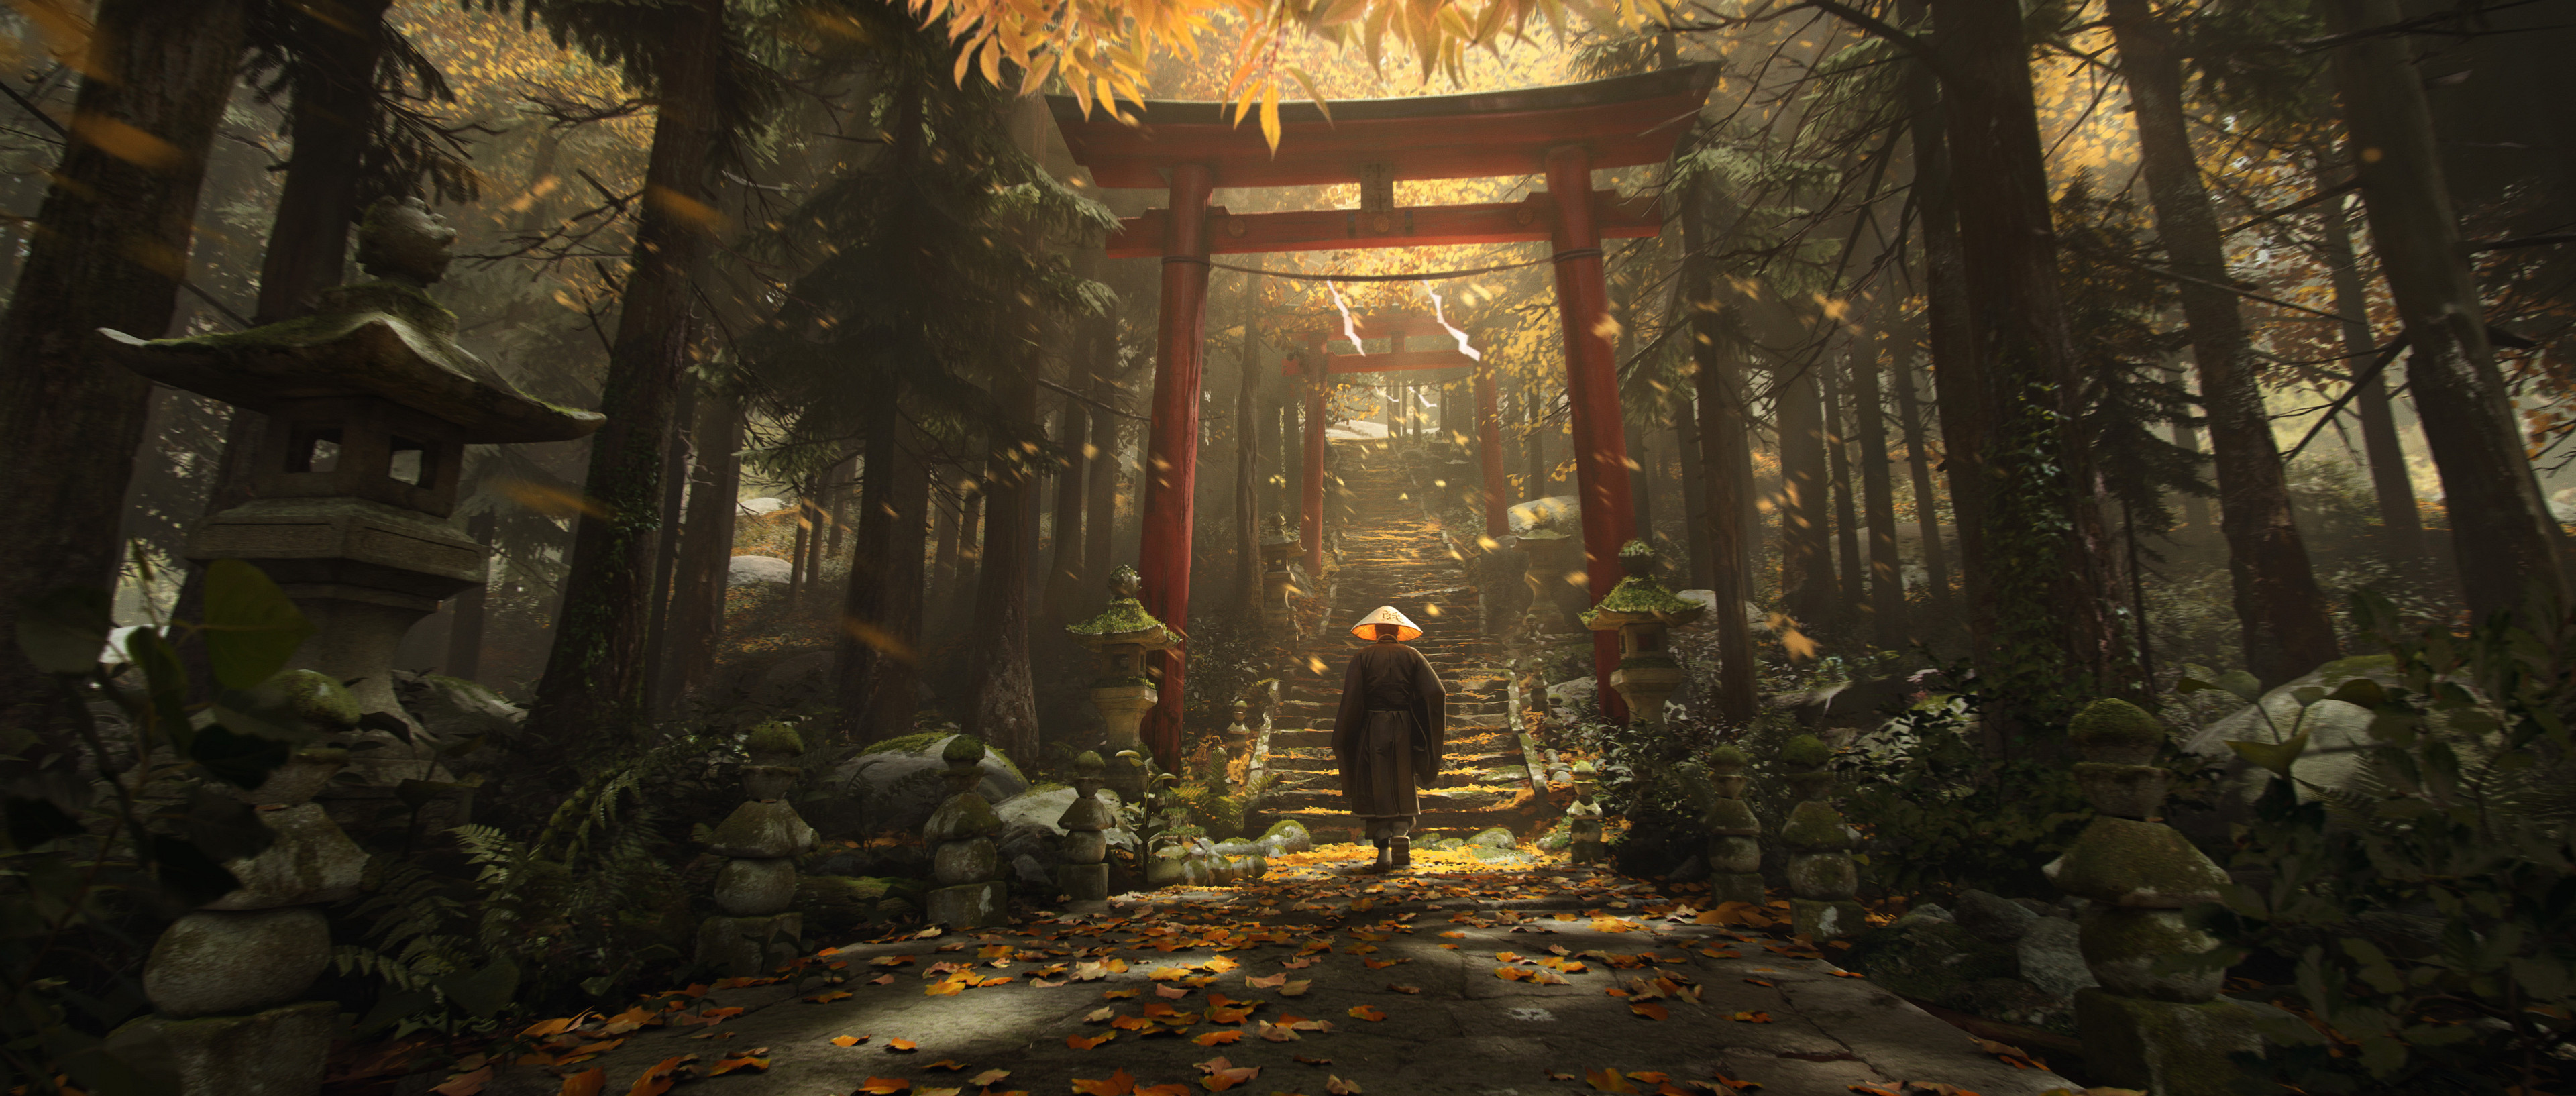 ghost of tsushima, video game